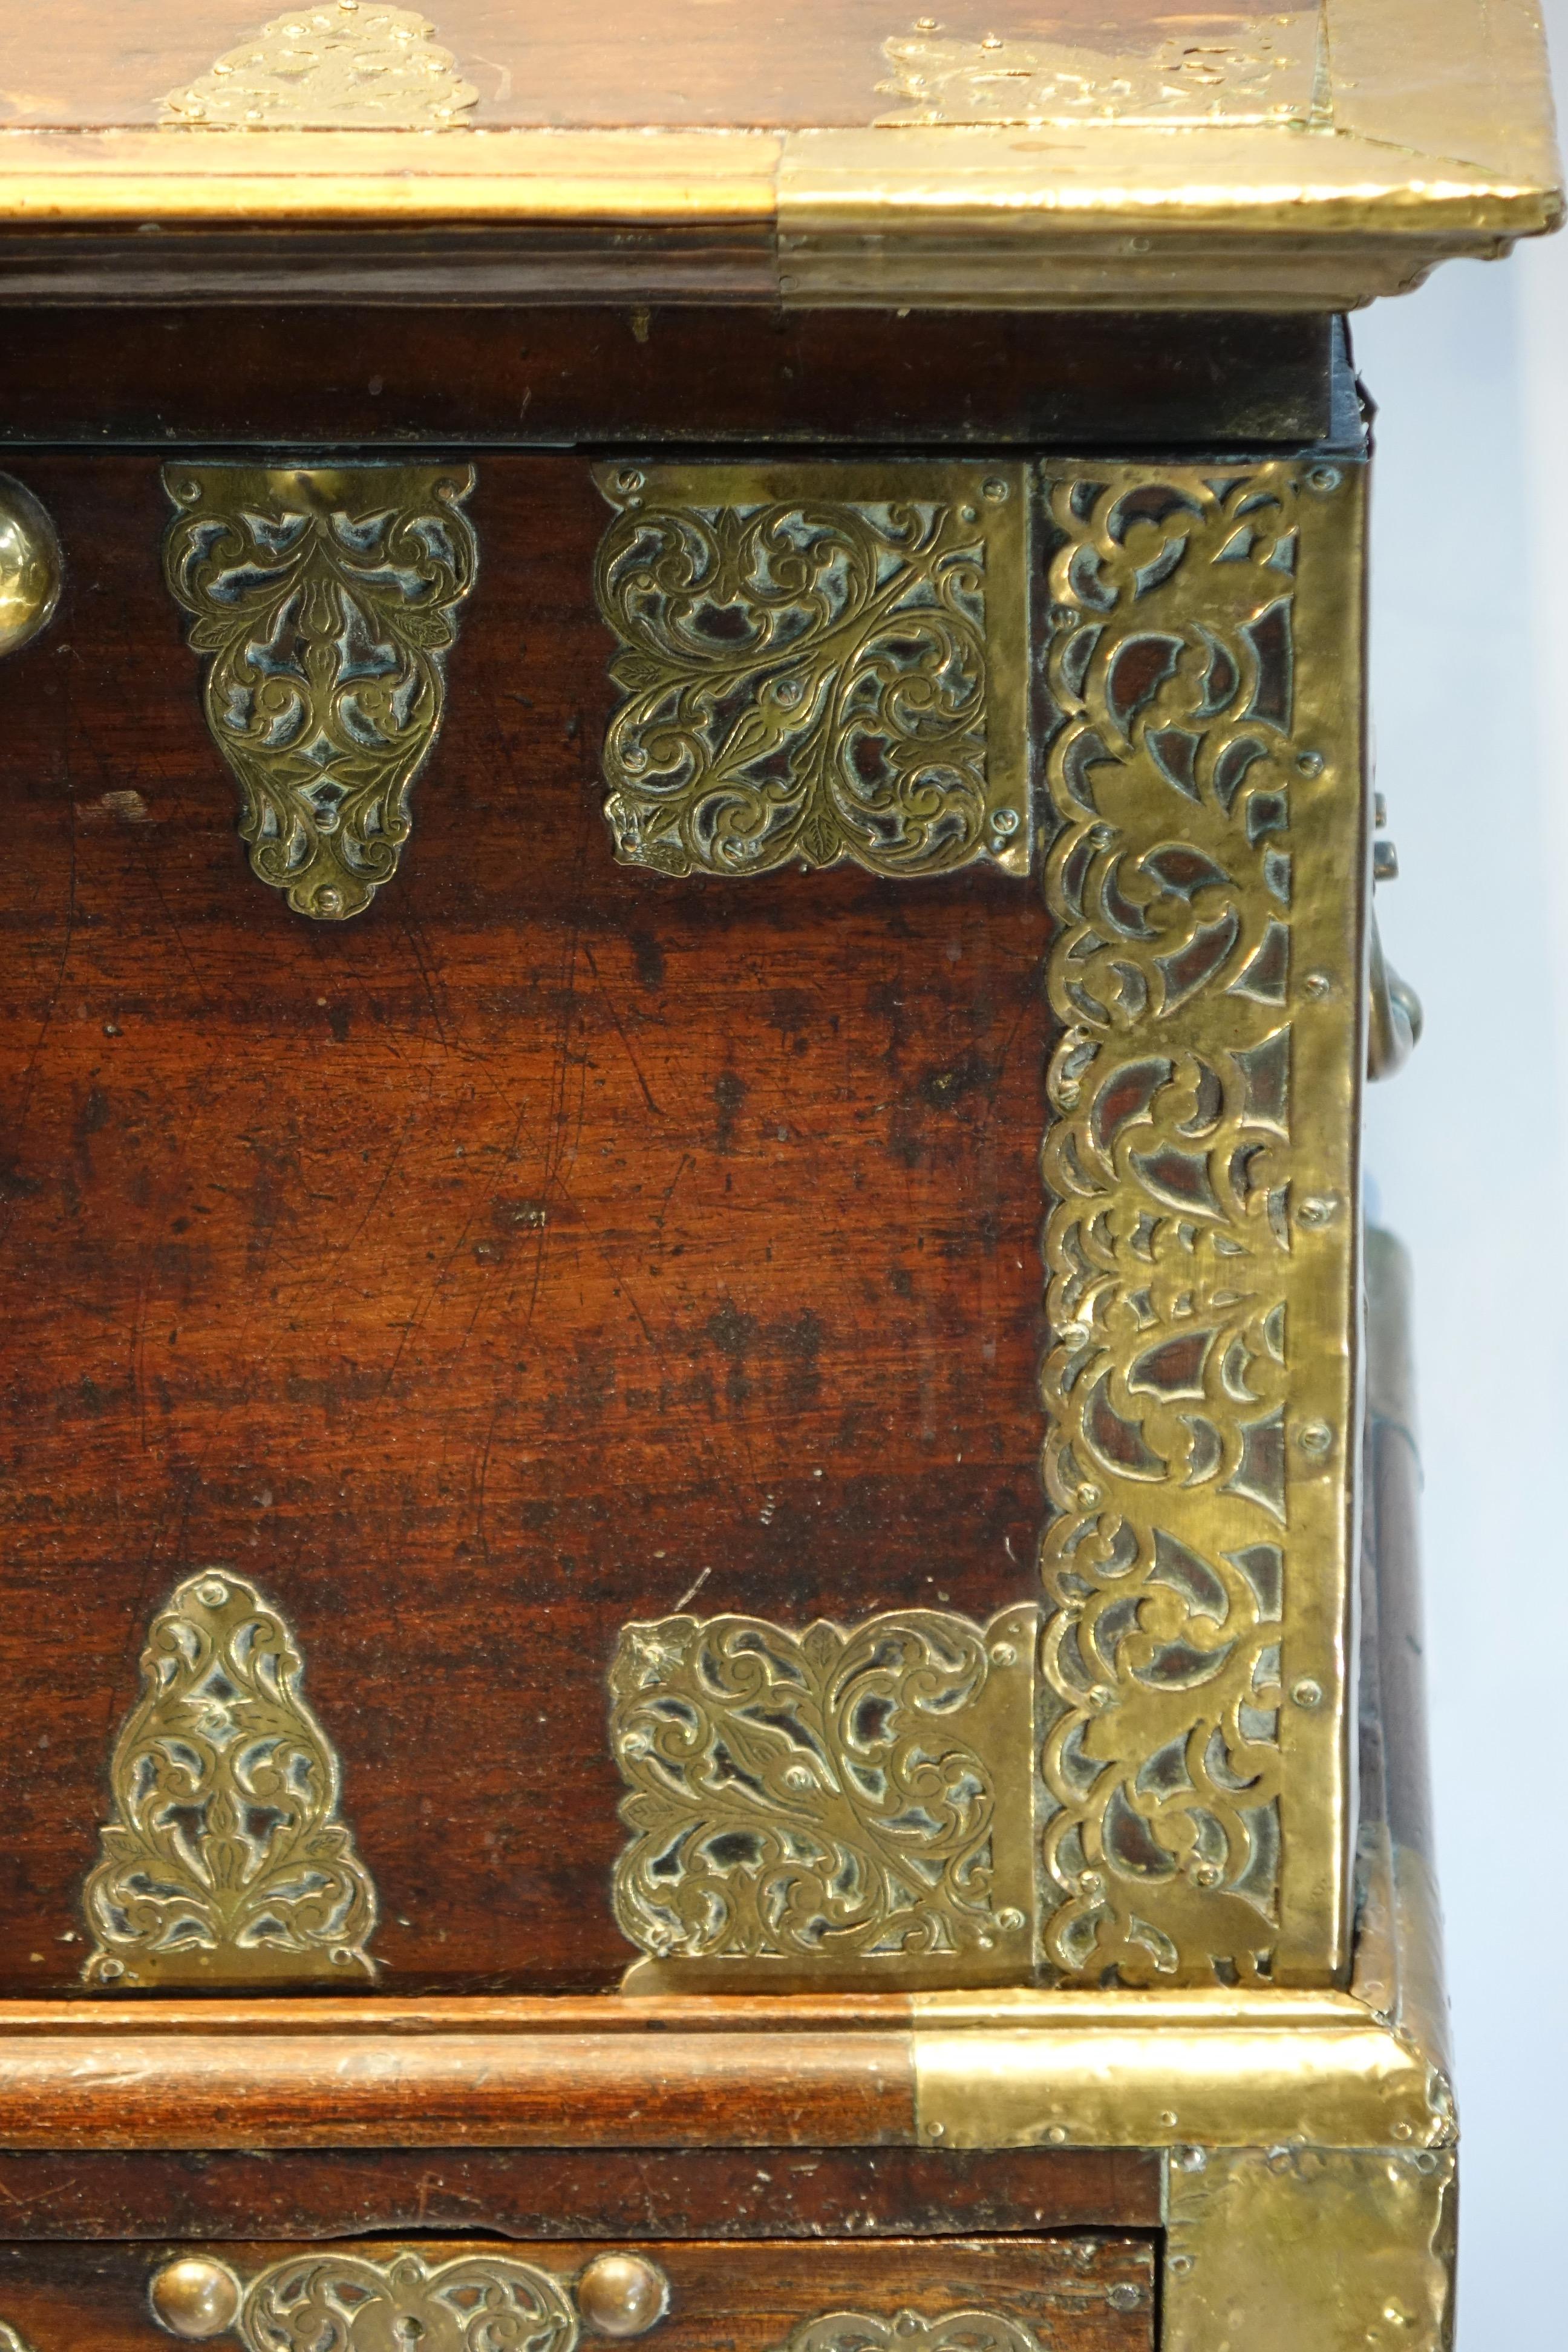 Teak wood chest with rich gilt copper applications of decorative scrolls and foliage, and probably two drooping tulips for the decoration in the center of the work top.
Handles for the drawers and carrying handles, as well as the key, are in